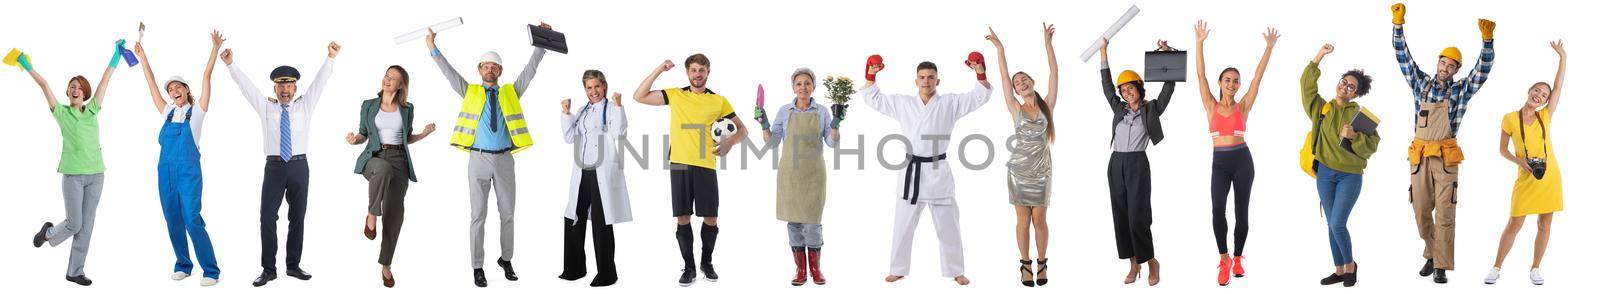 Set collage image of profession different workers with raised arms isolated over white background, full length portrait